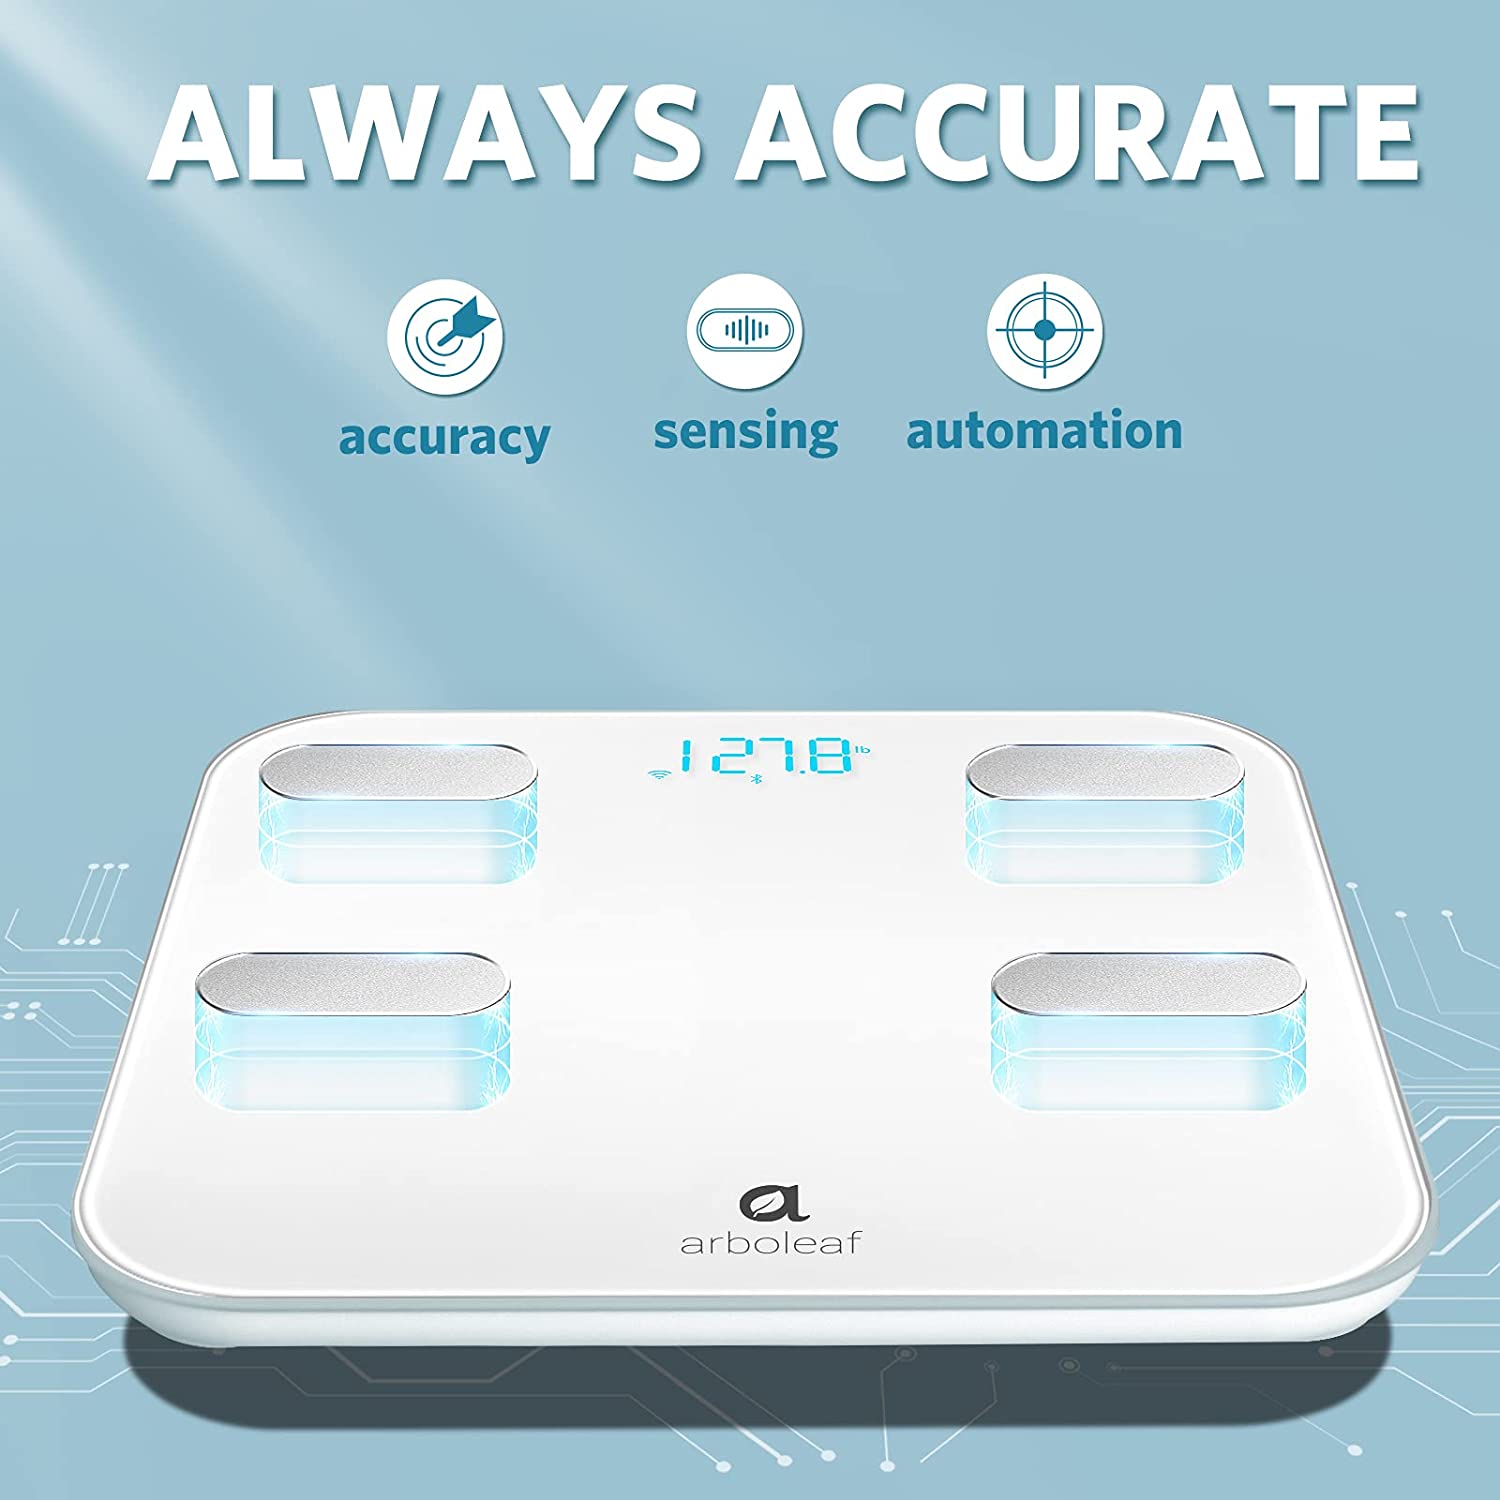 Digital scale for body weight connect in WIFI n Bluetooth